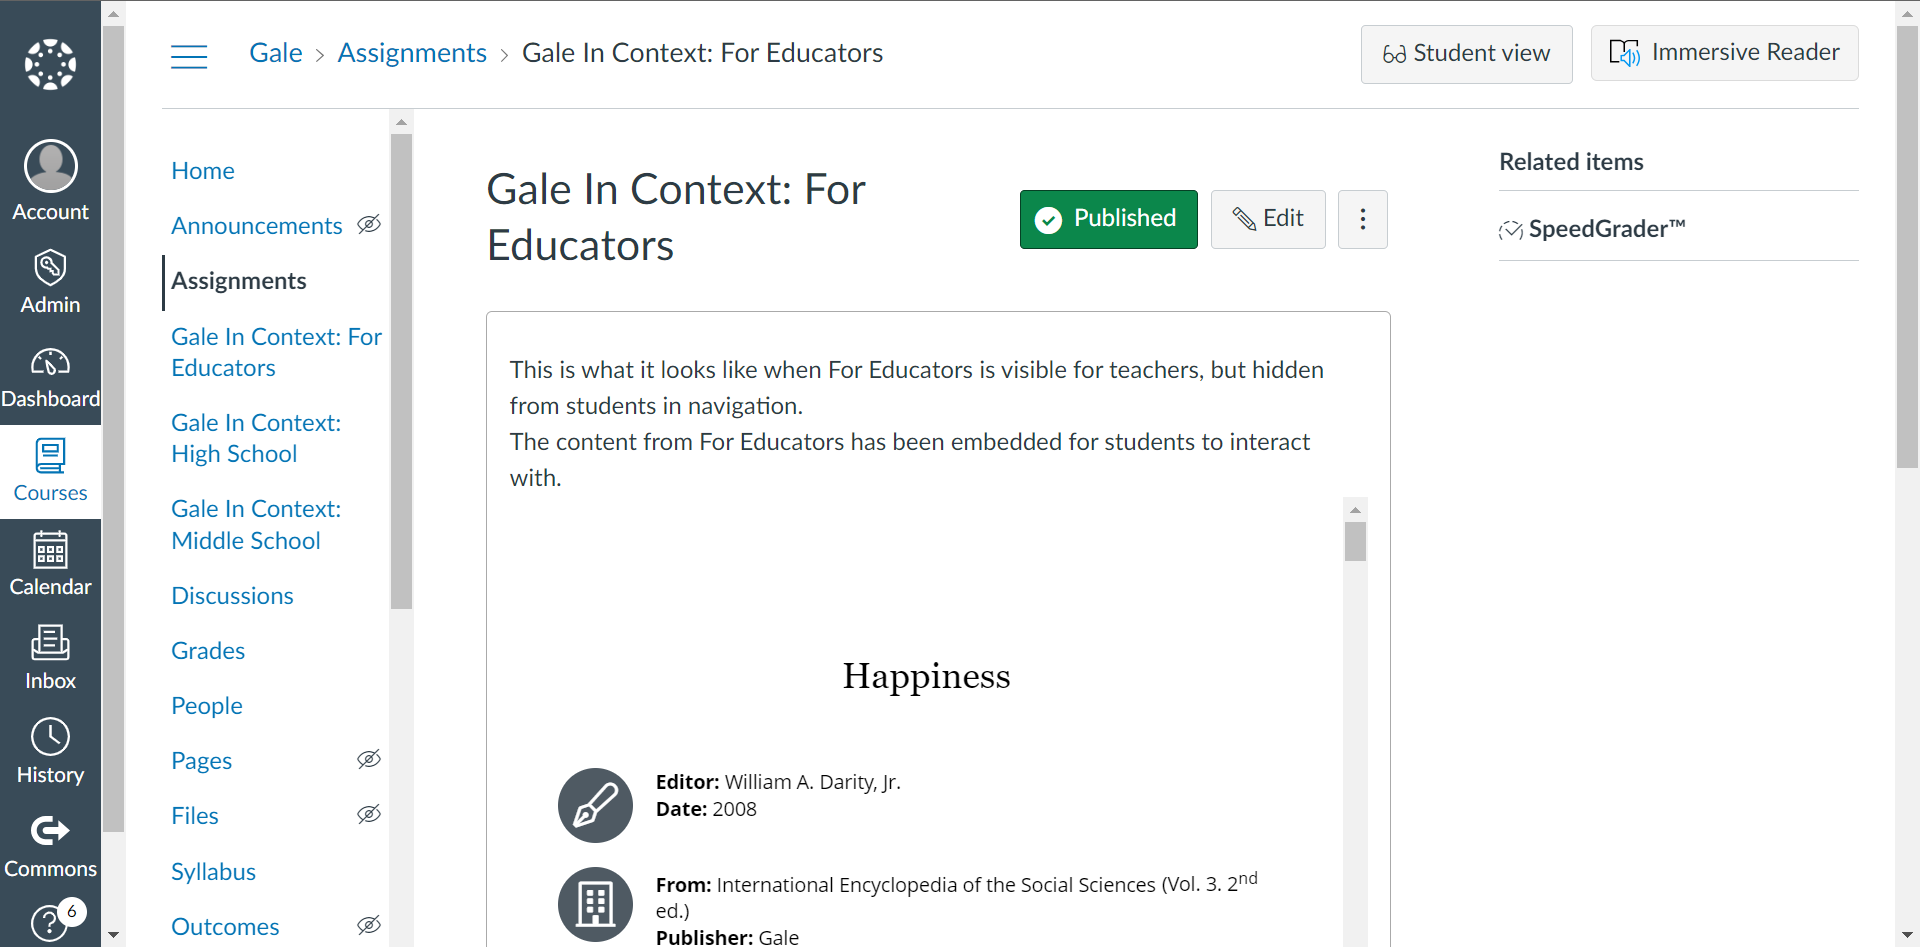 This screenshot is from a course showing an article from Gale In Context: For Educators embedded in an assignment in Canvas. Notice the left-hand navigation reveals a links to three Gale resources - Gale In Context: High School, Gale In Context: Middle School, and Gale In Context: For Educators.